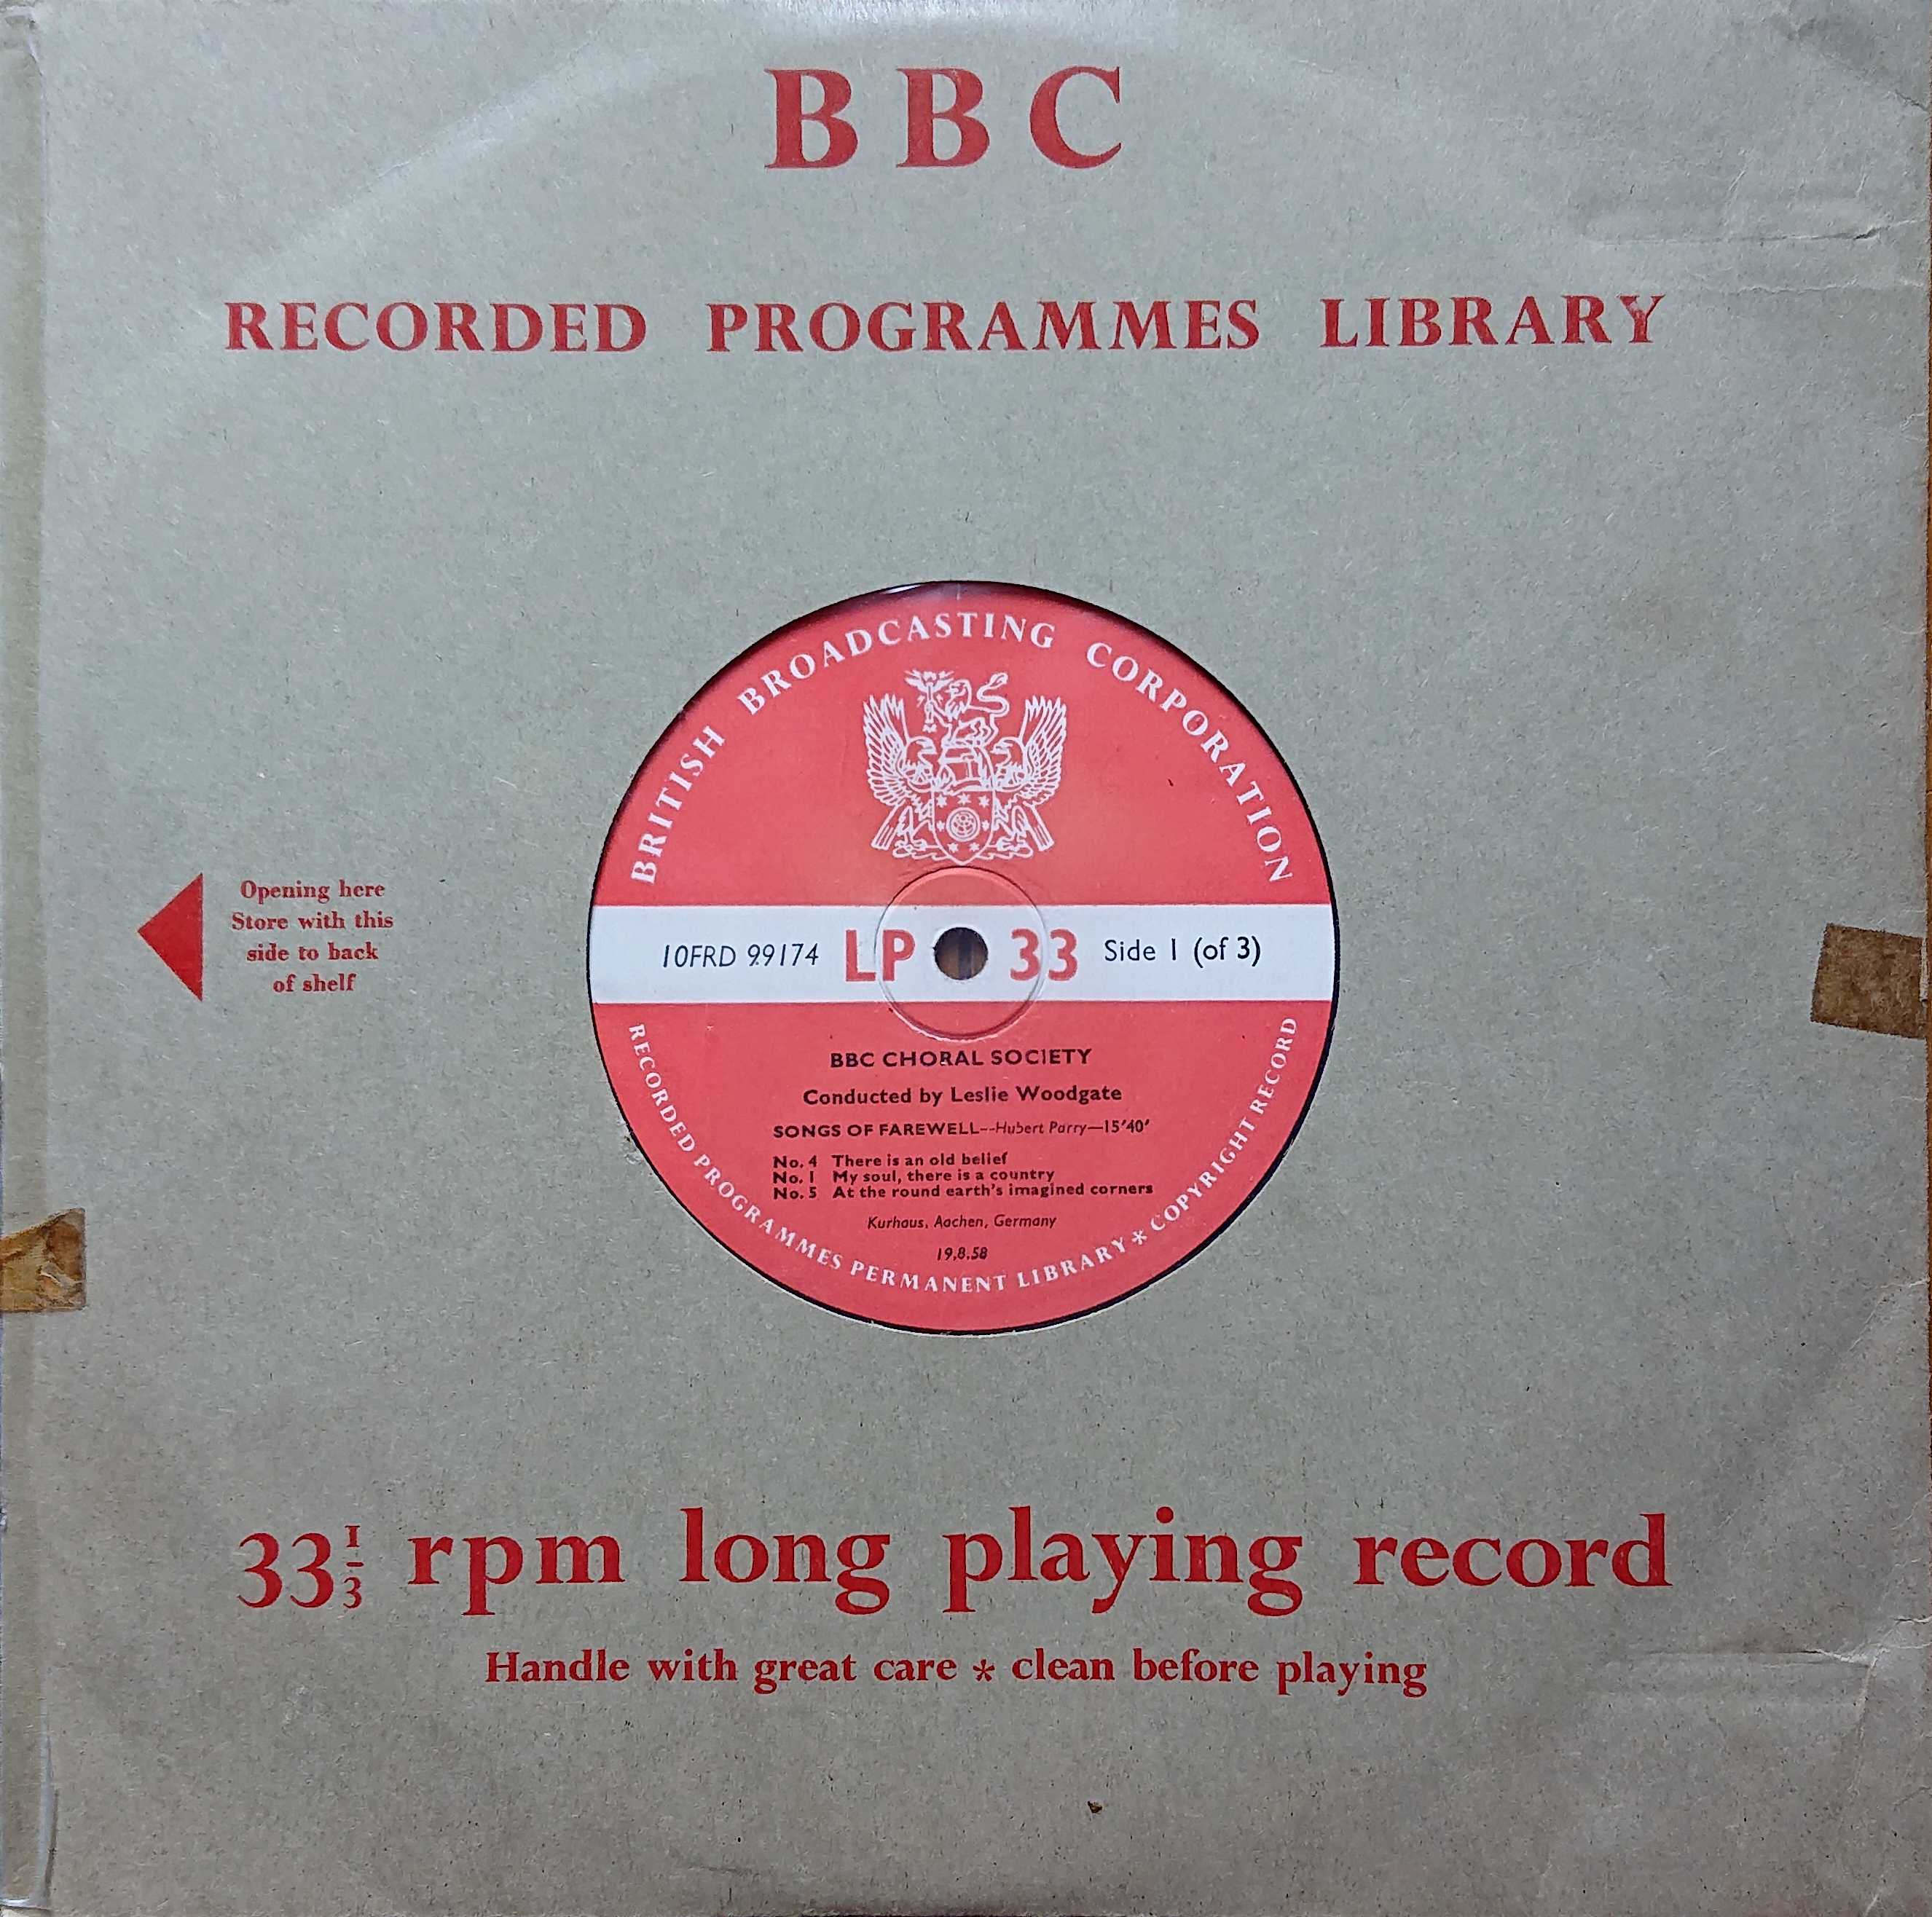 Picture of 10FRD 99174 BBC Choral Society by artist Hubert Parry Samuel Wesley / Arnold Bax from the BBC 10inches - Records and Tapes library